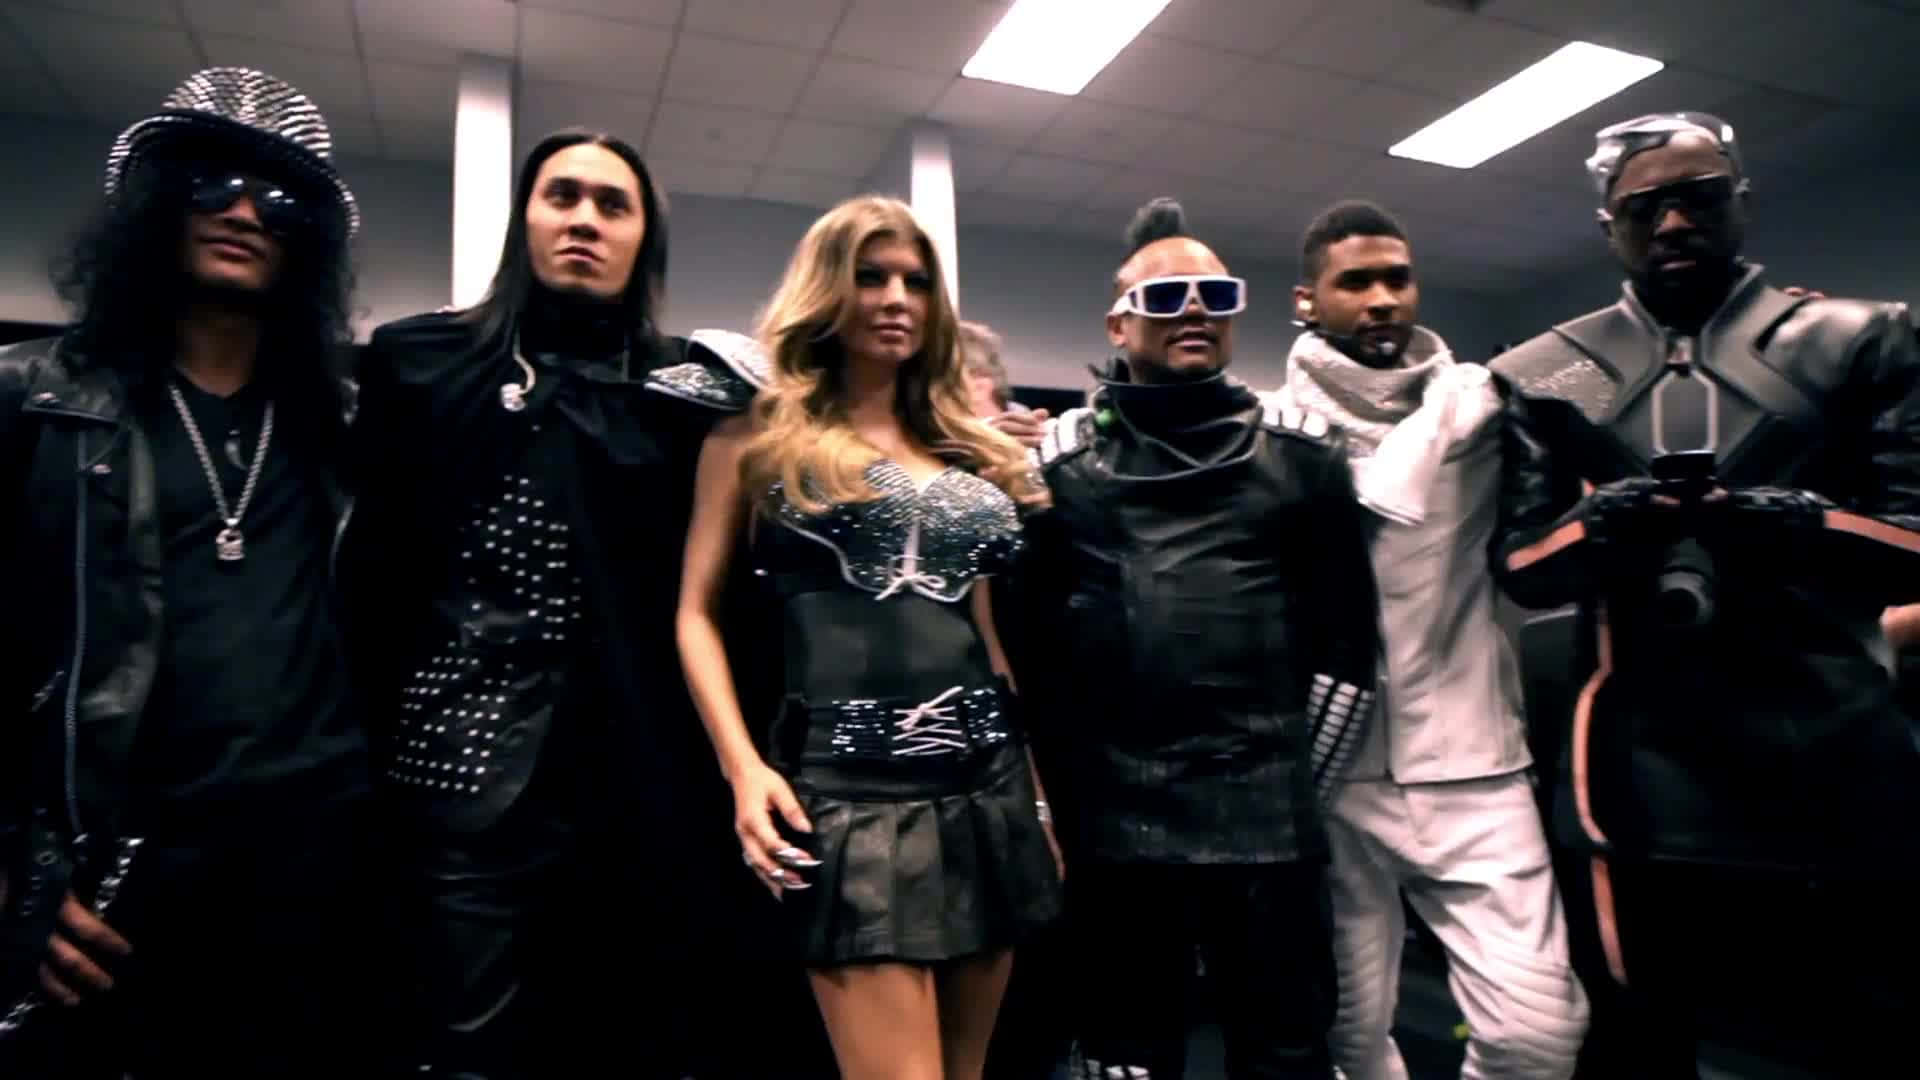 The Black Eyed Peas are unstoppable! Wallpaper